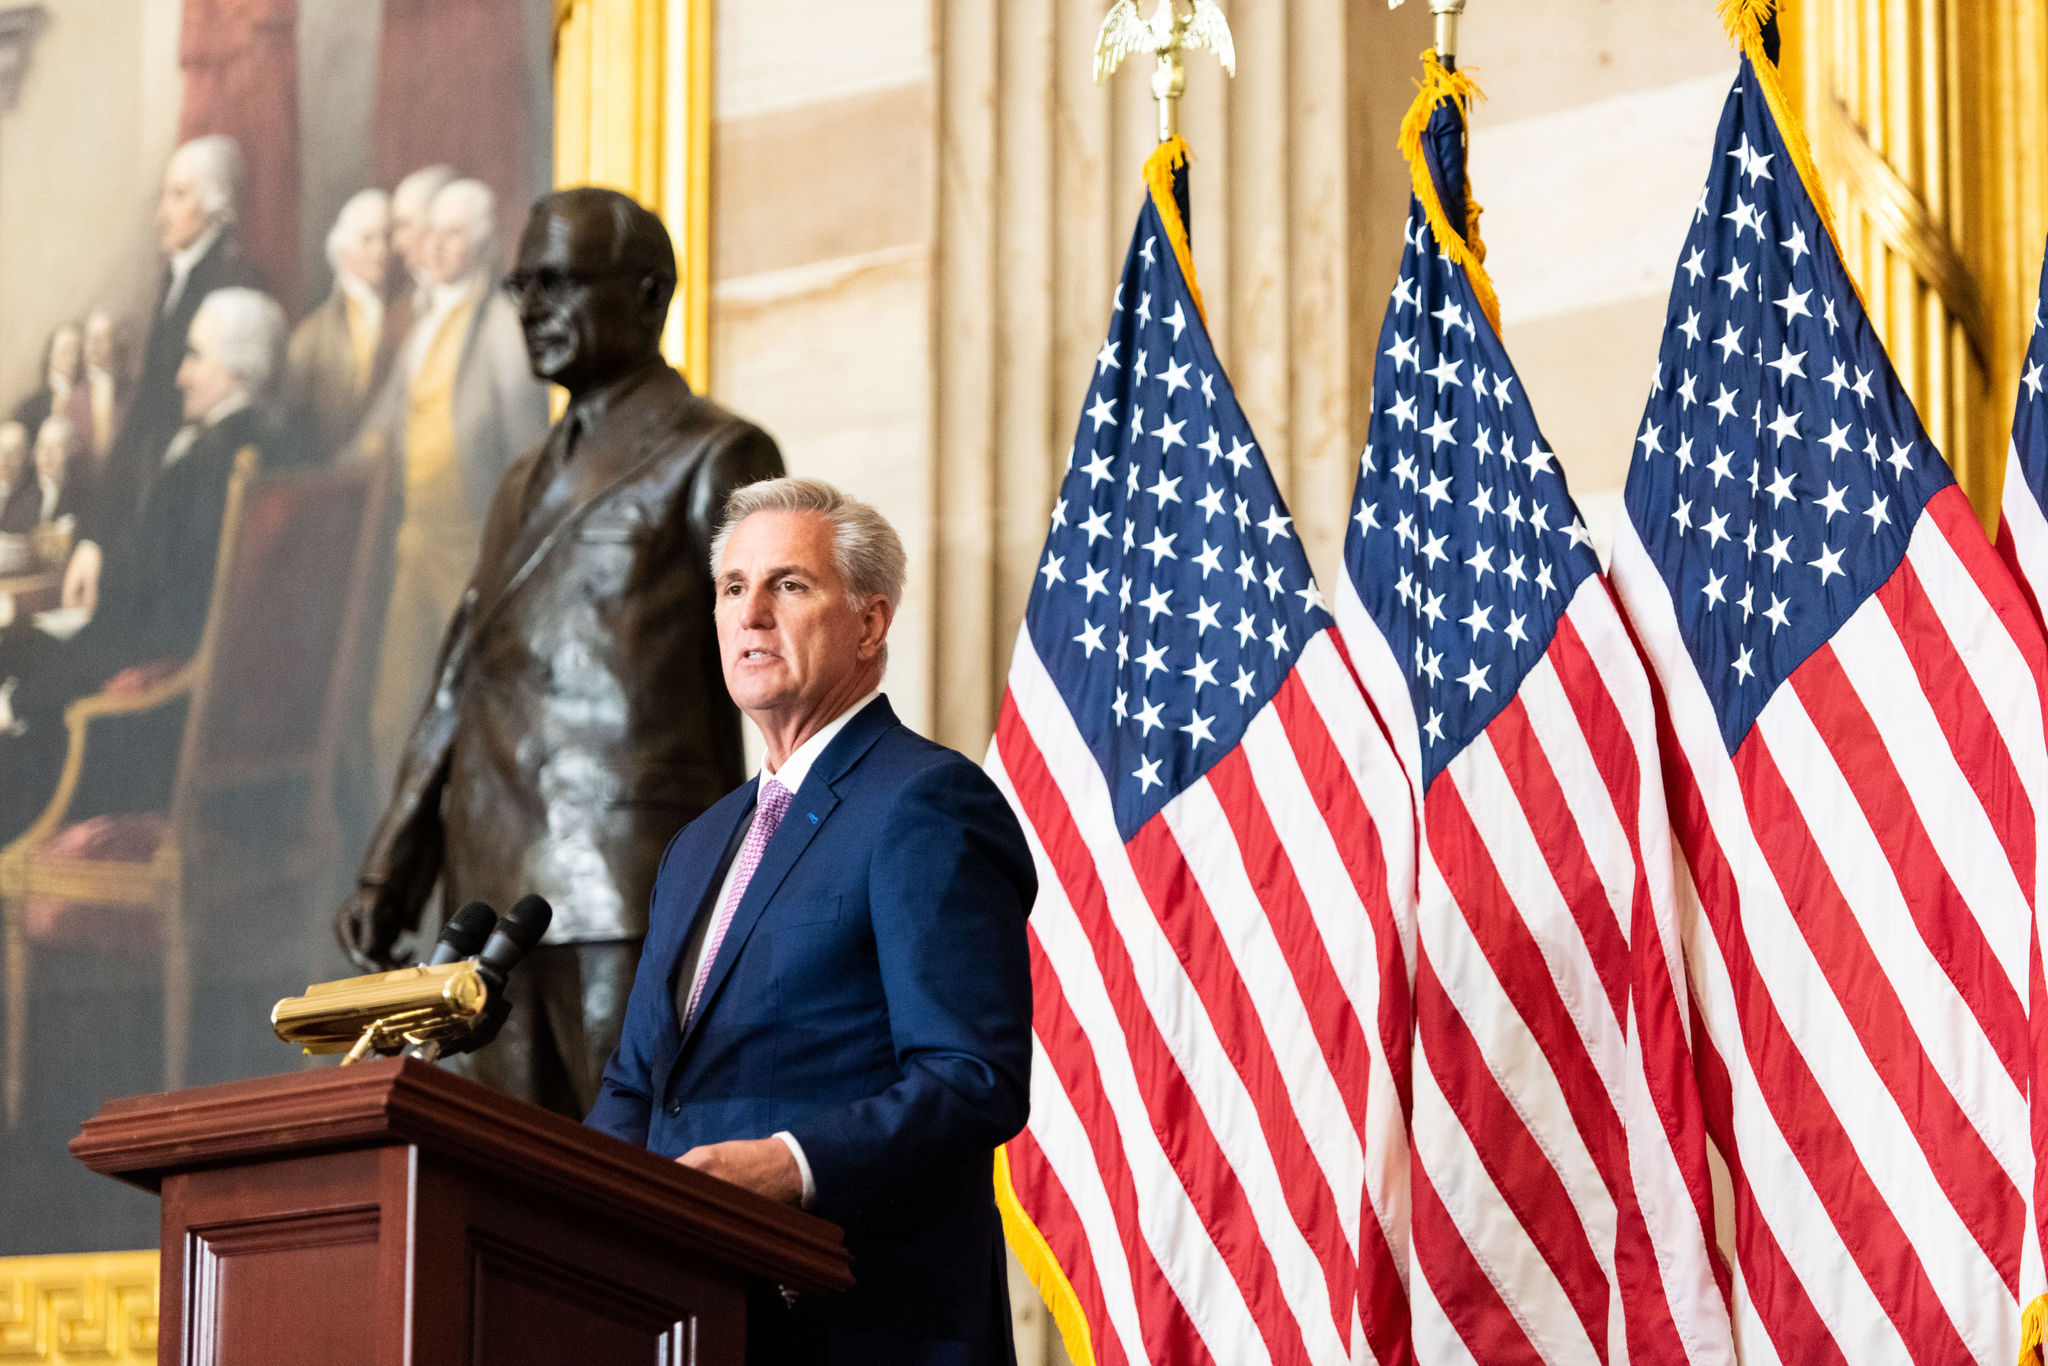 Honorable Kevin McCarthy spoke at the unveiling and dedication of the Truman Statue in the U.S. Capitol Rotunda